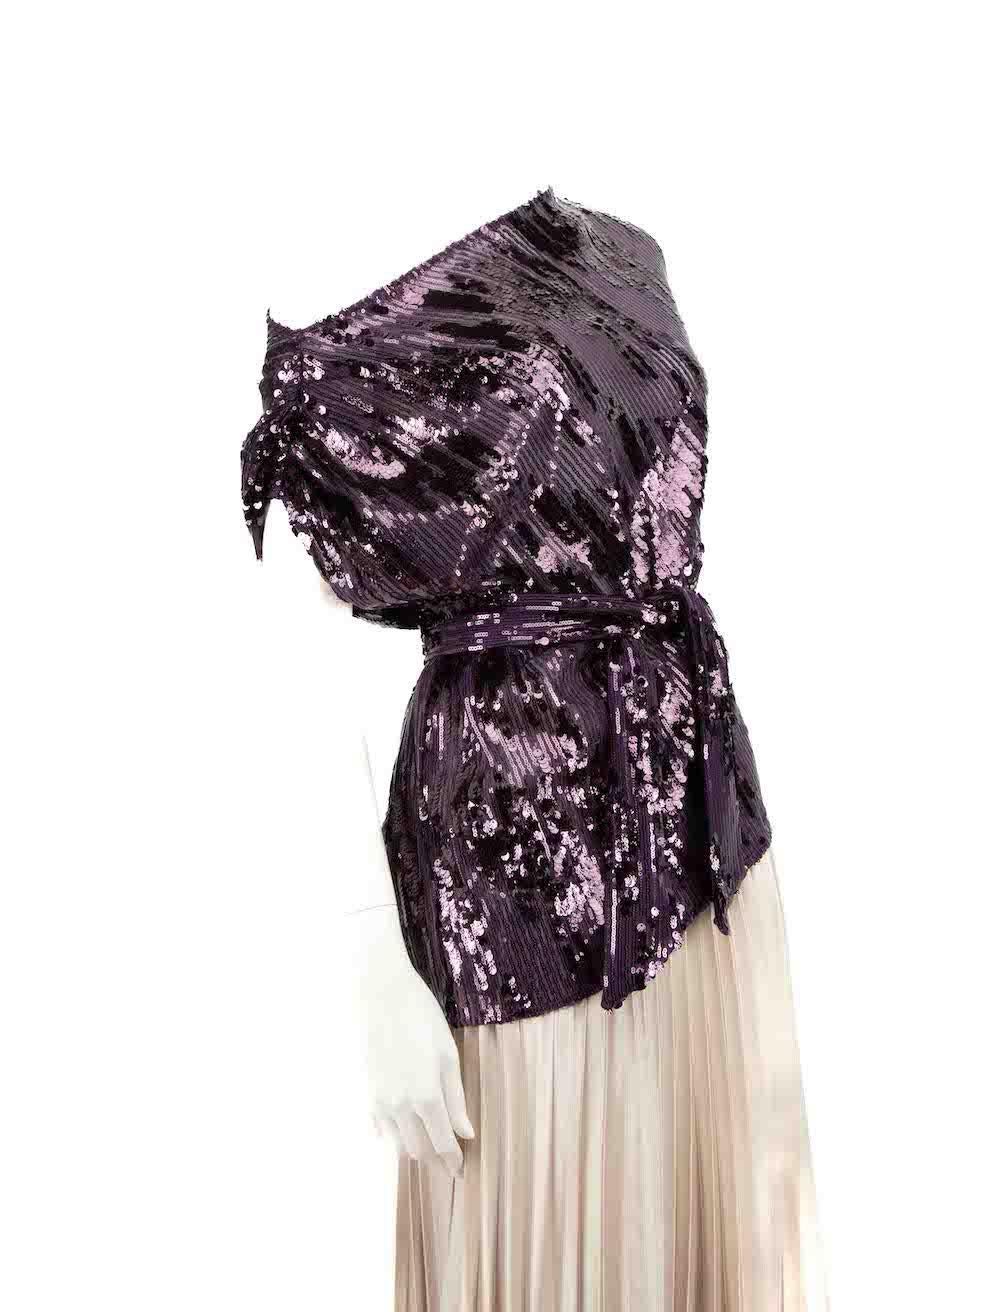 CONDITION is Very good. Minimal wear to top is evident. Minimal wear to neckline with missing sequins and loose threads on this used Honayda designer resale item.
 
 
 
 Details
 
 
 Purple
 
 Synthetic
 
 Top
 
 Sequinned
 
 Asymmetric sleeves
 
